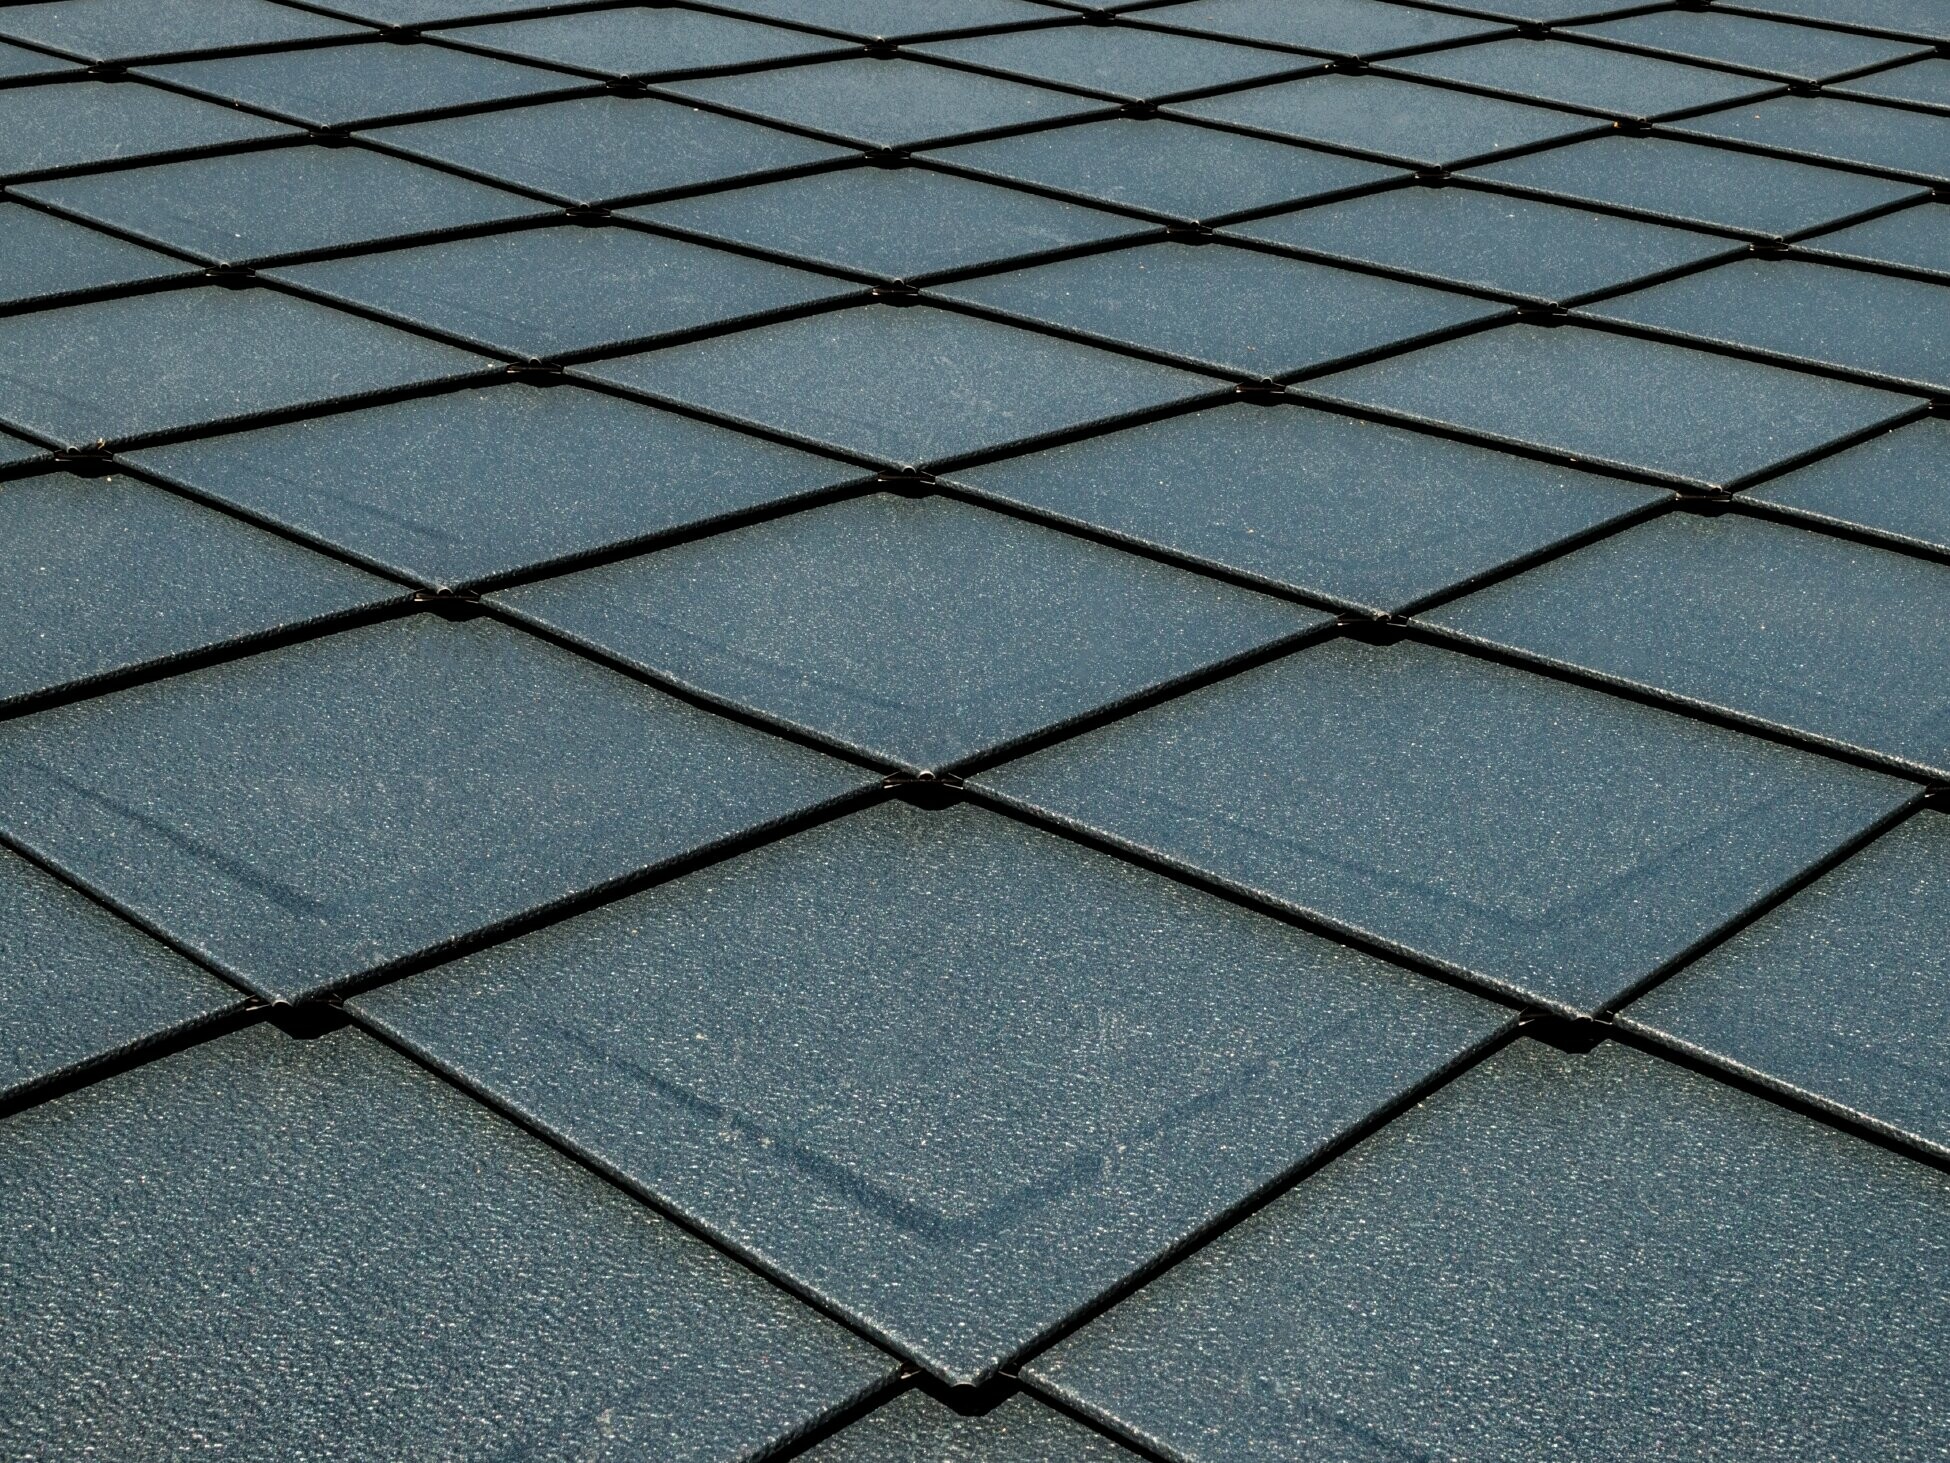 PREFA rhomboid roof tiles 29 × 29 in P.10 anthracite with beading installed as a surface, roof with scaly appearance